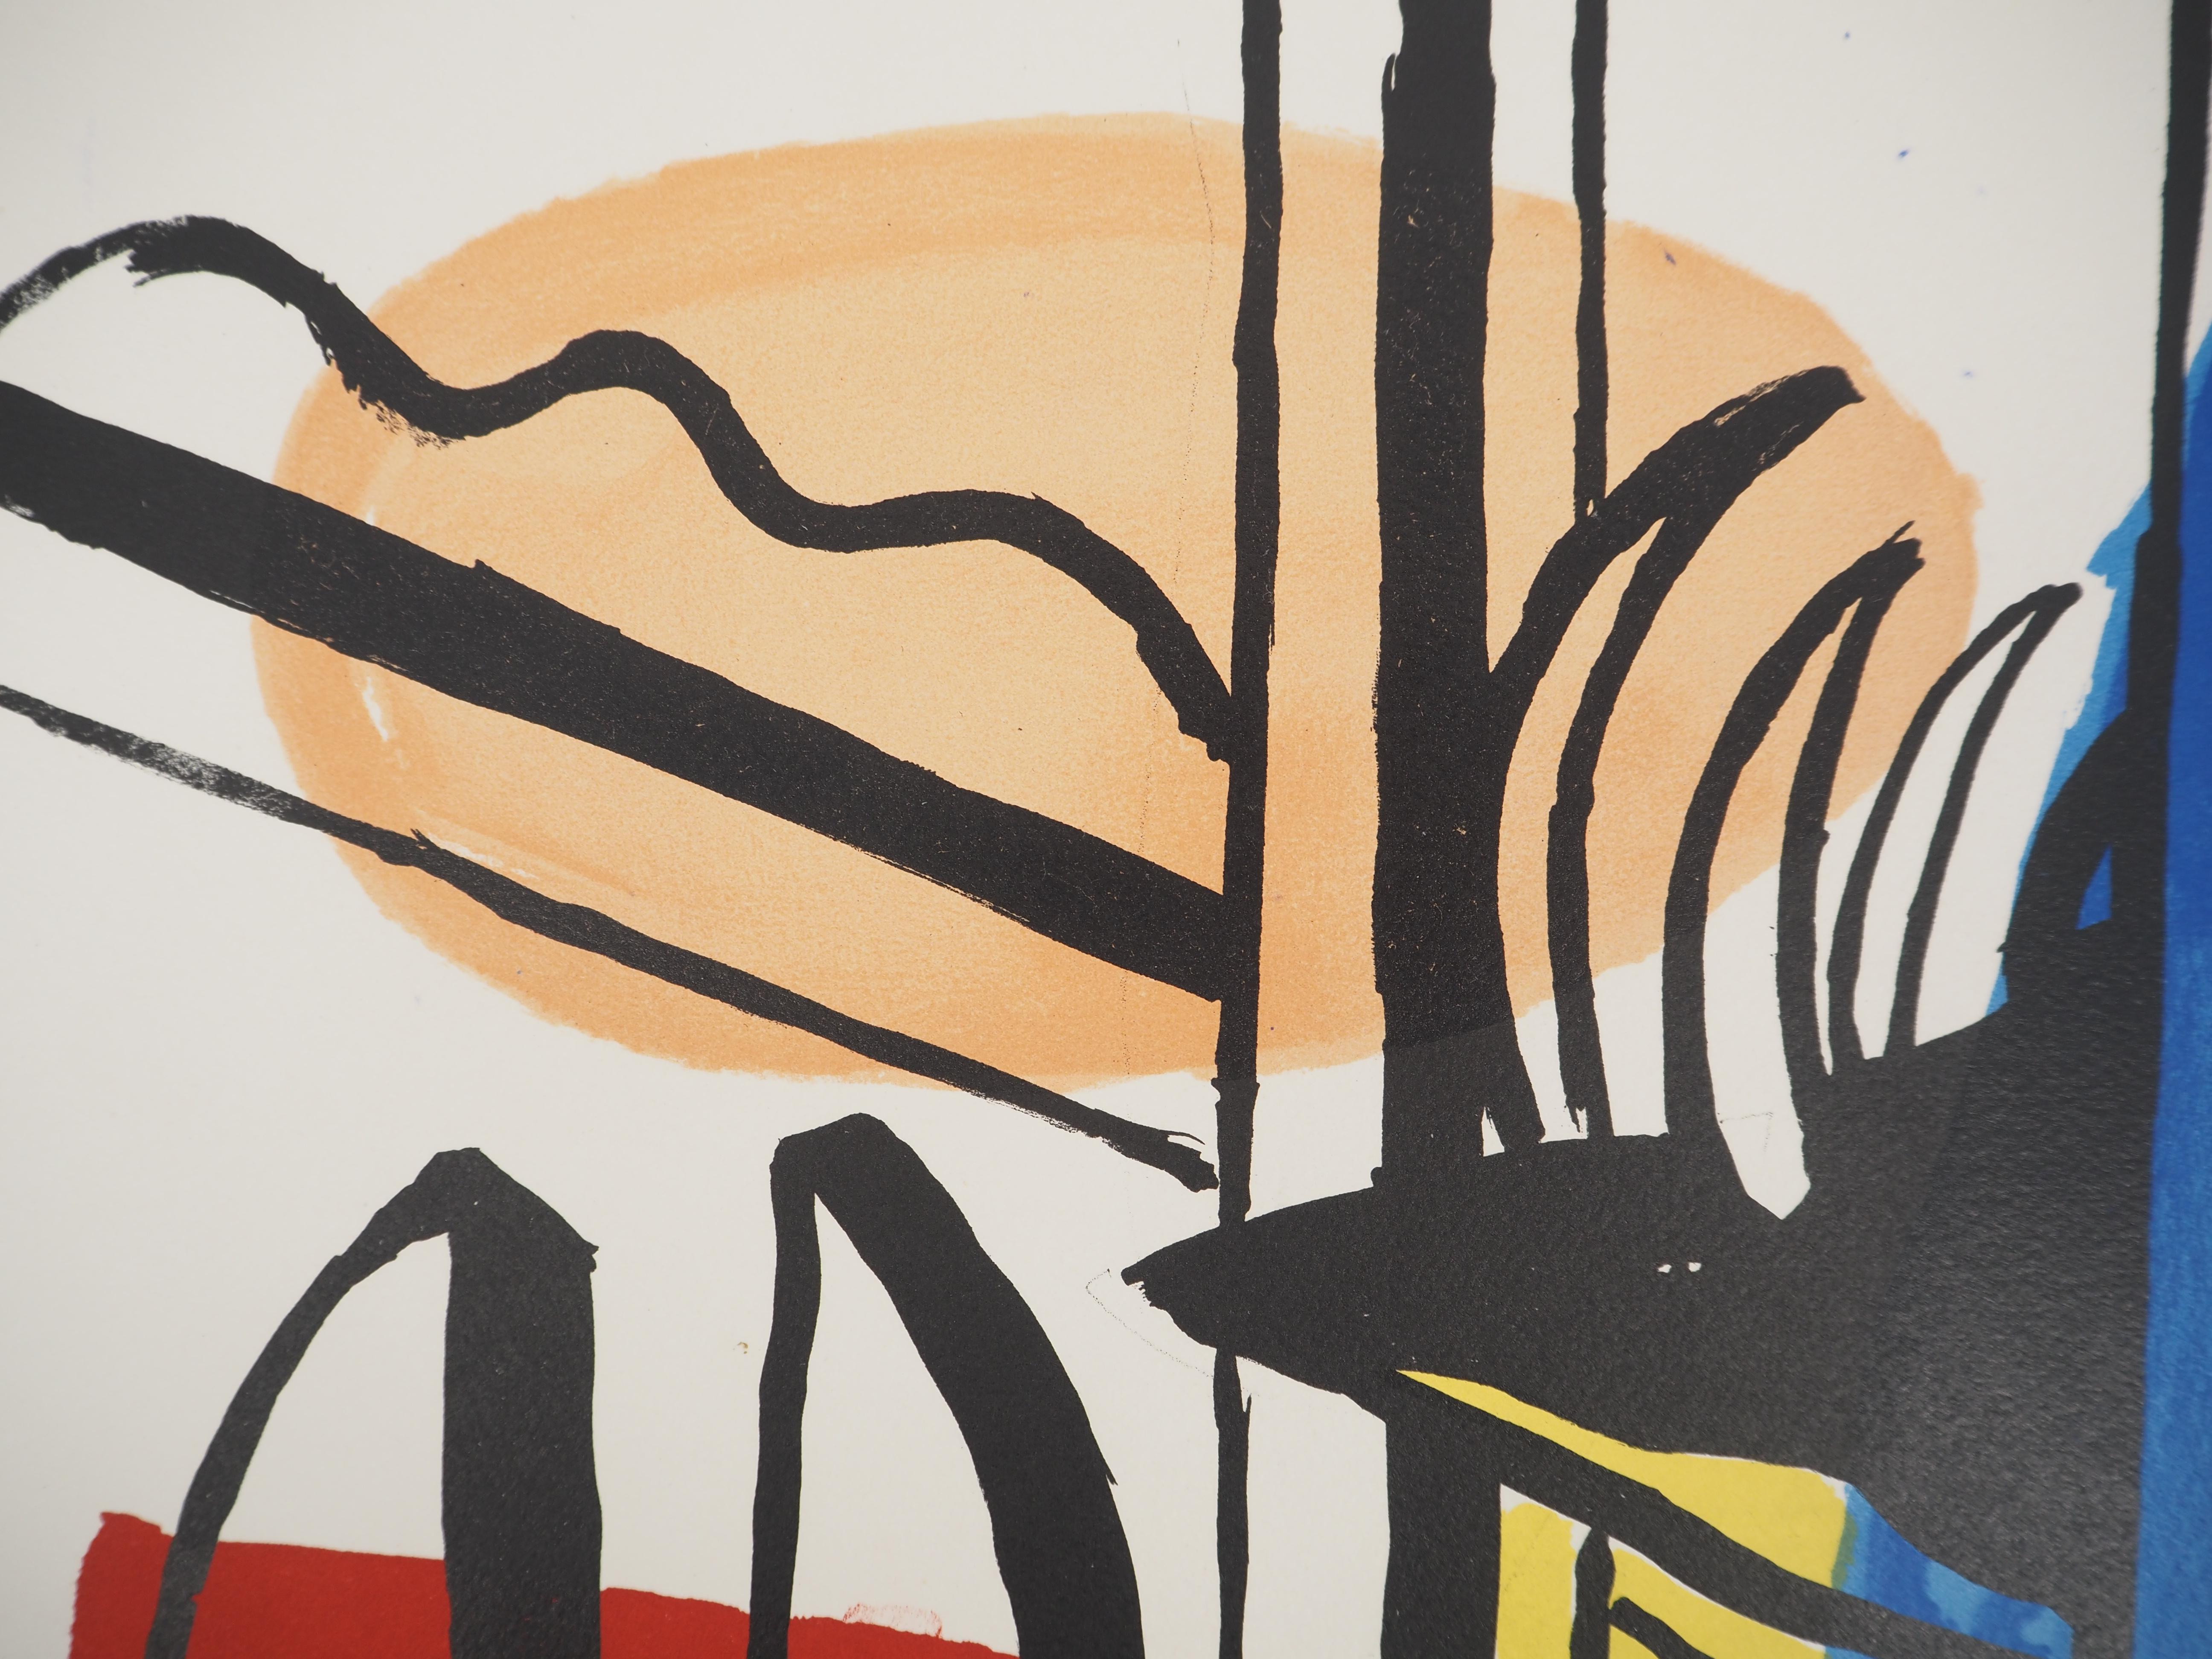 Fernand Léger
Woman powdering herself, 1959

Original lithograph (Atelier Mourlot)
Signed with the artist's stamp
Limited to 180 copies (Here numbered 160)
On Arches vellum  66 x 50.5 cm (c. 25.9 x 19.6 in)

REFERENCES :
- Catalog raisonne Saphire